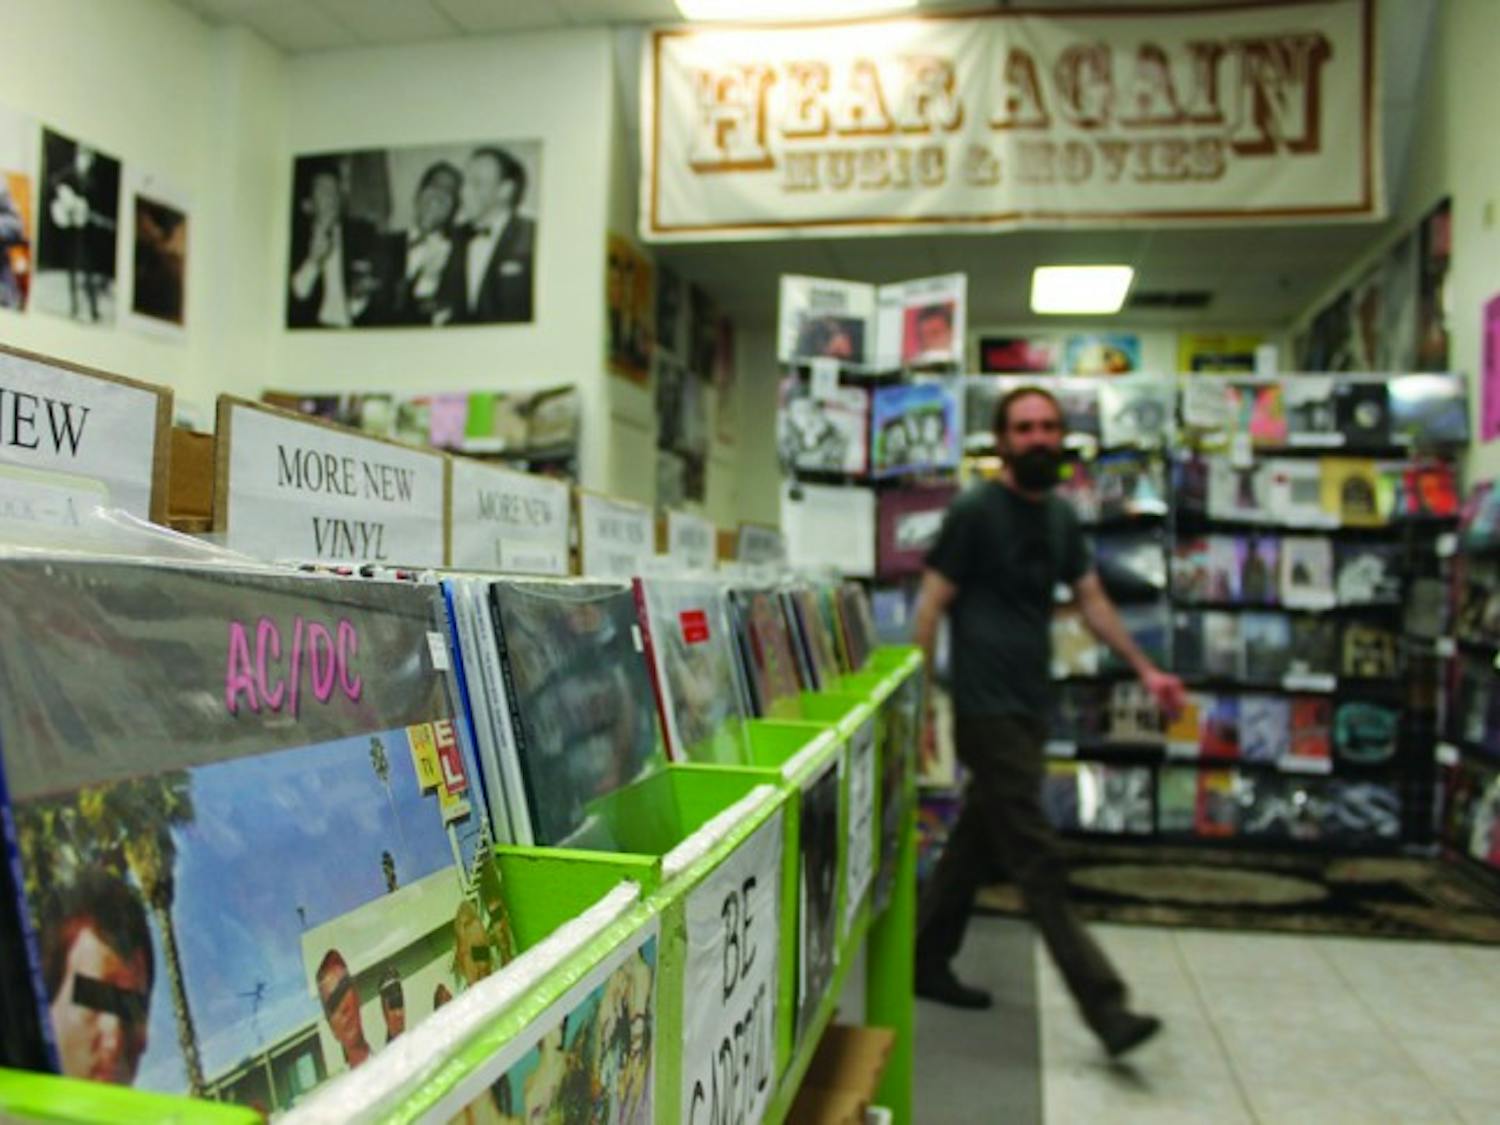 Andrew Schaer owner of Hear Again Music and Movies, returns from helping a customer. Hear Again Music and Movies is one of three surviving record stores in Gainesville, along with Hyde &amp; Zeke Records and Wayward Council.